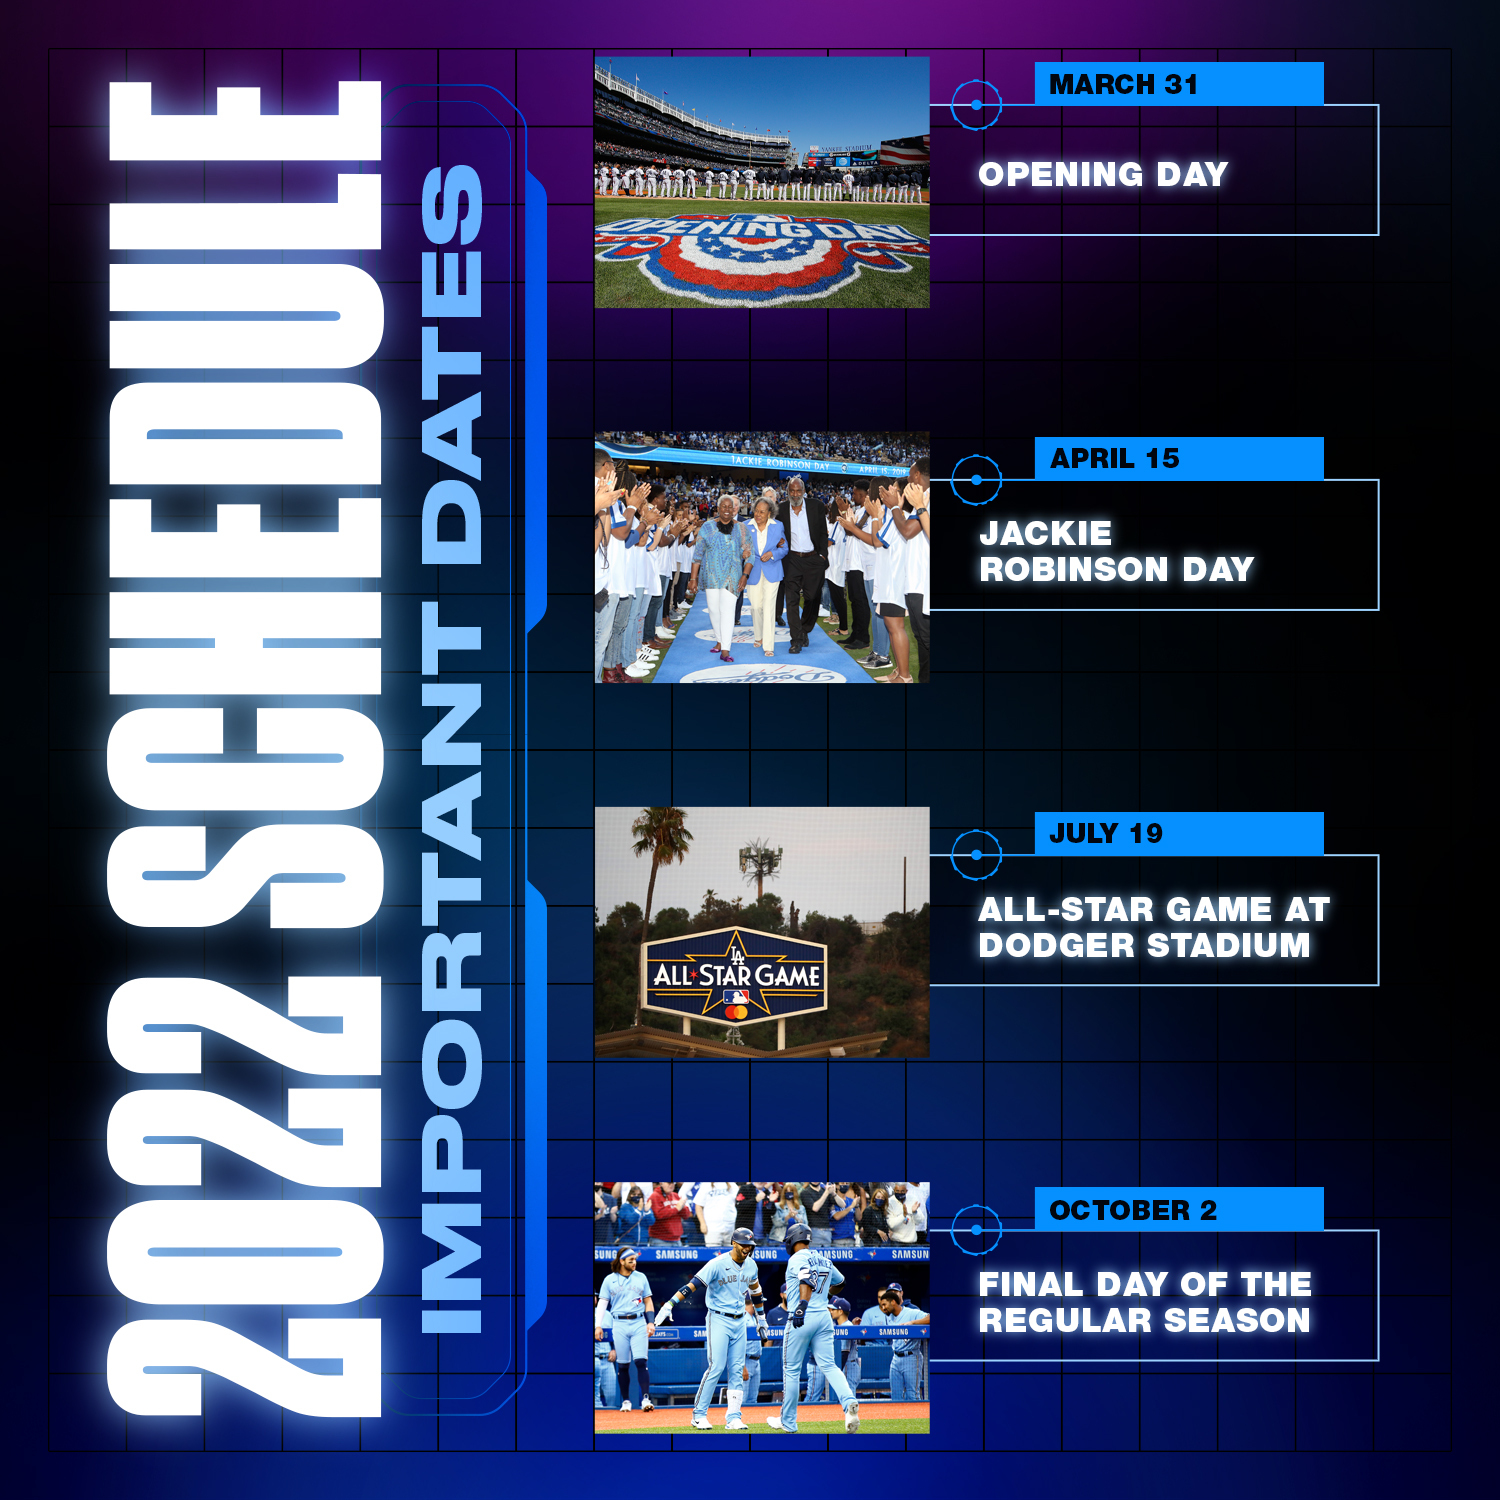 Mlb Regular Season Schedule 2022 Mlb On Twitter: "The 2022 Schedule Is Out! Mark Your Calendar Accordingly.  ⬇️ Https://T.co/By19Zgwwbu" / Twitter